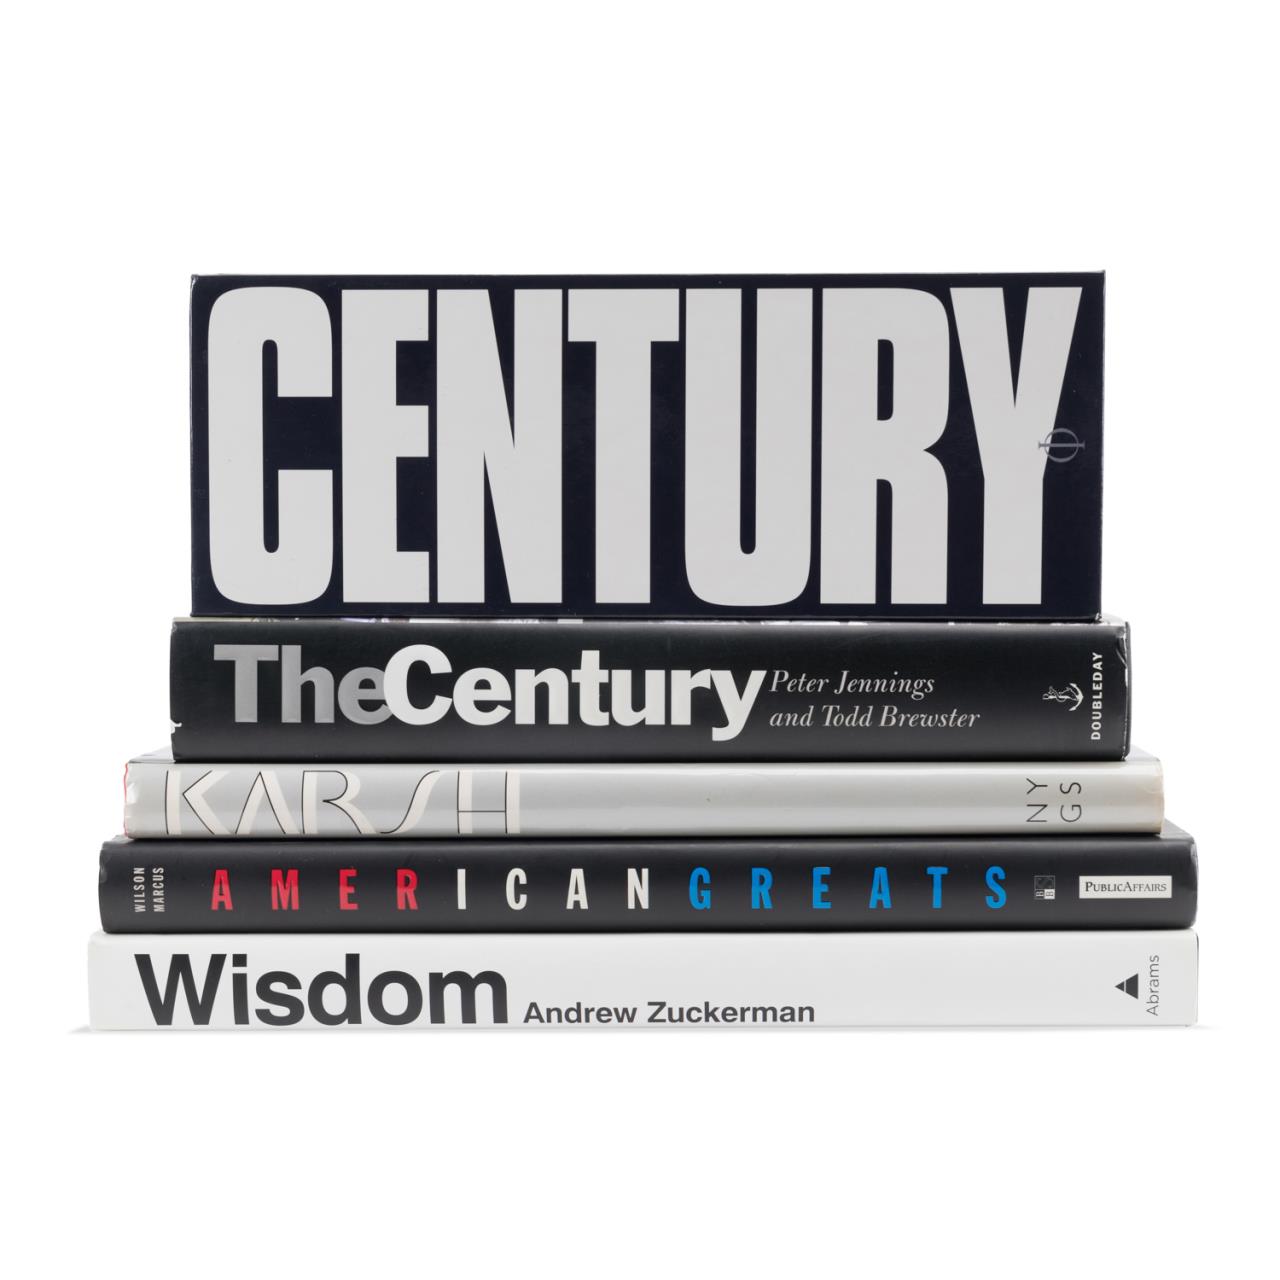 FIVE BOOKS ON THE 20TH CENTURY